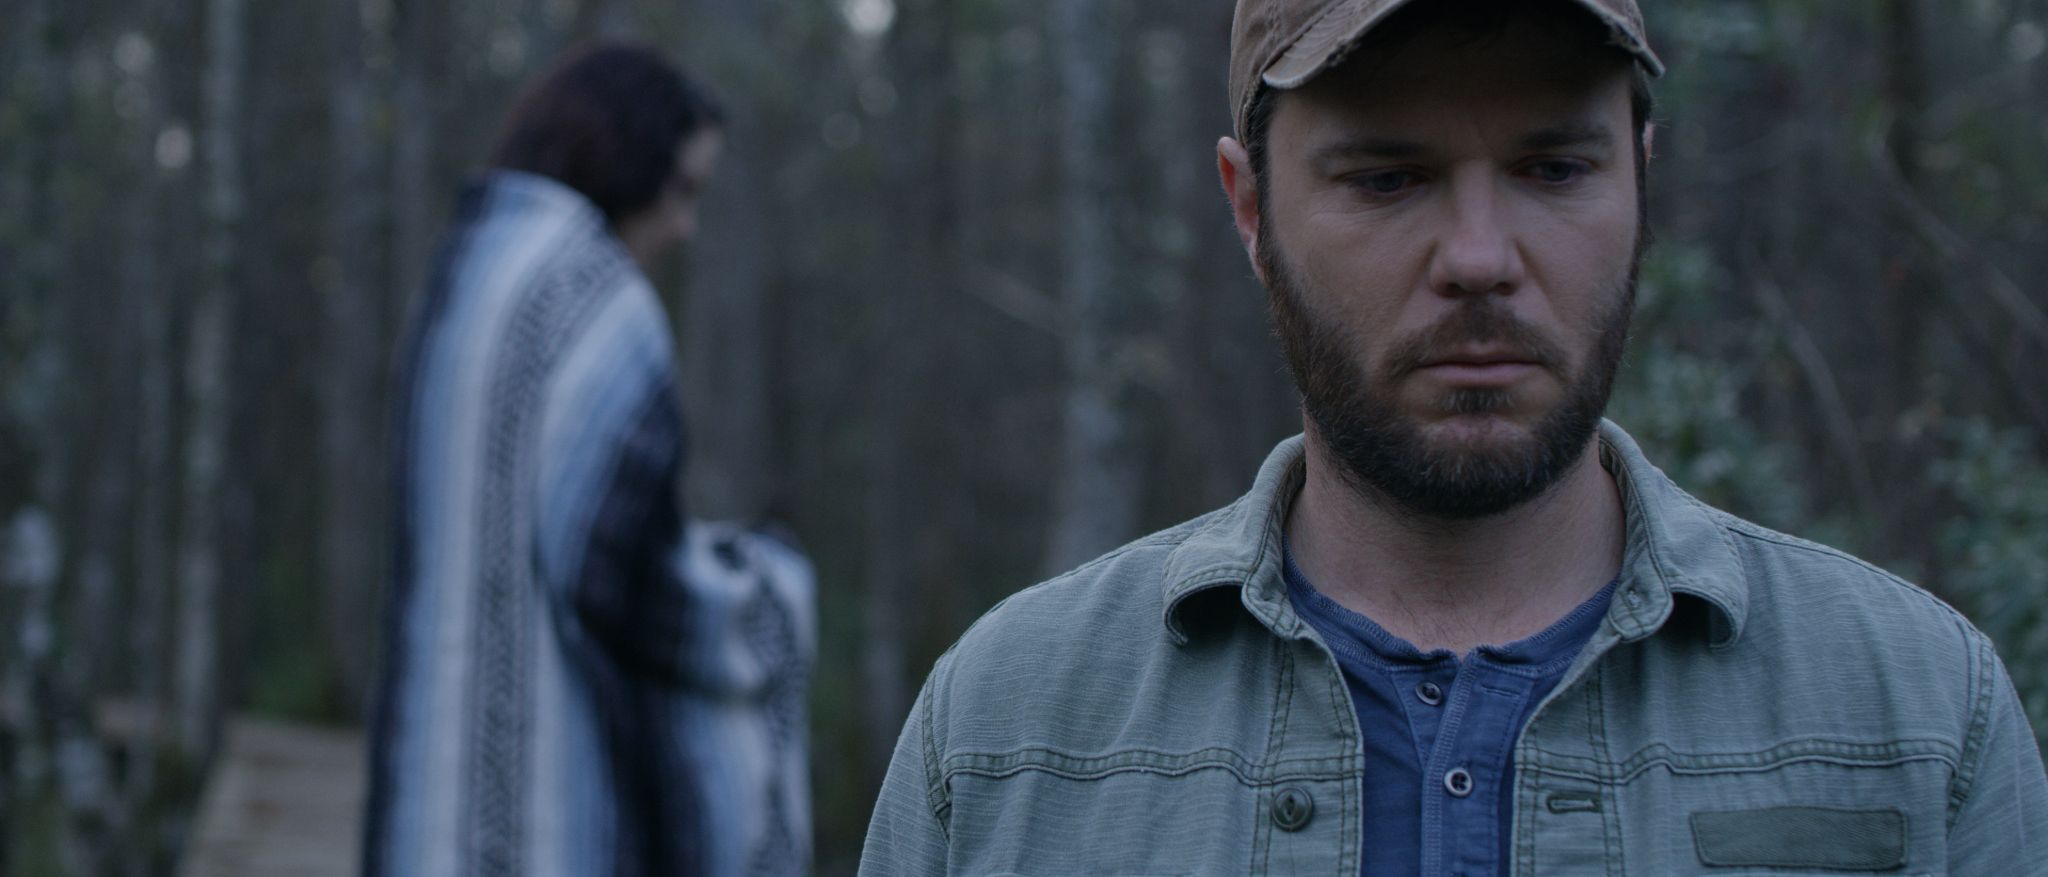 The Elements of an Effective Brand Film Man with beard wearing beige cap looking down while woman stand behind him wearing a blanket